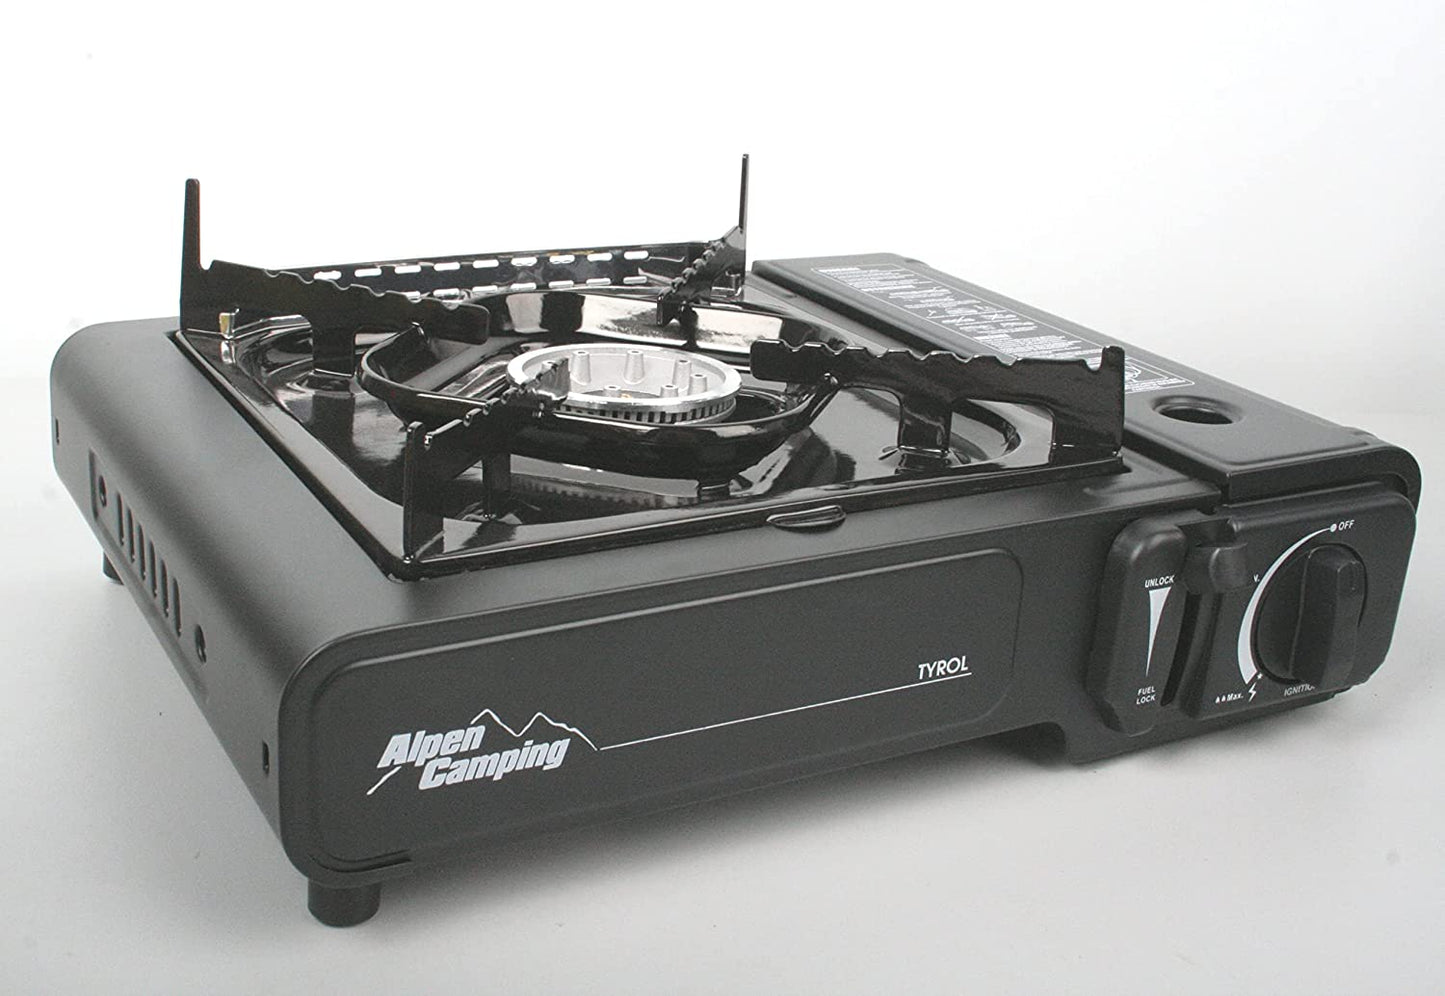 Premium gas cooker, camping cooker for outdoor use